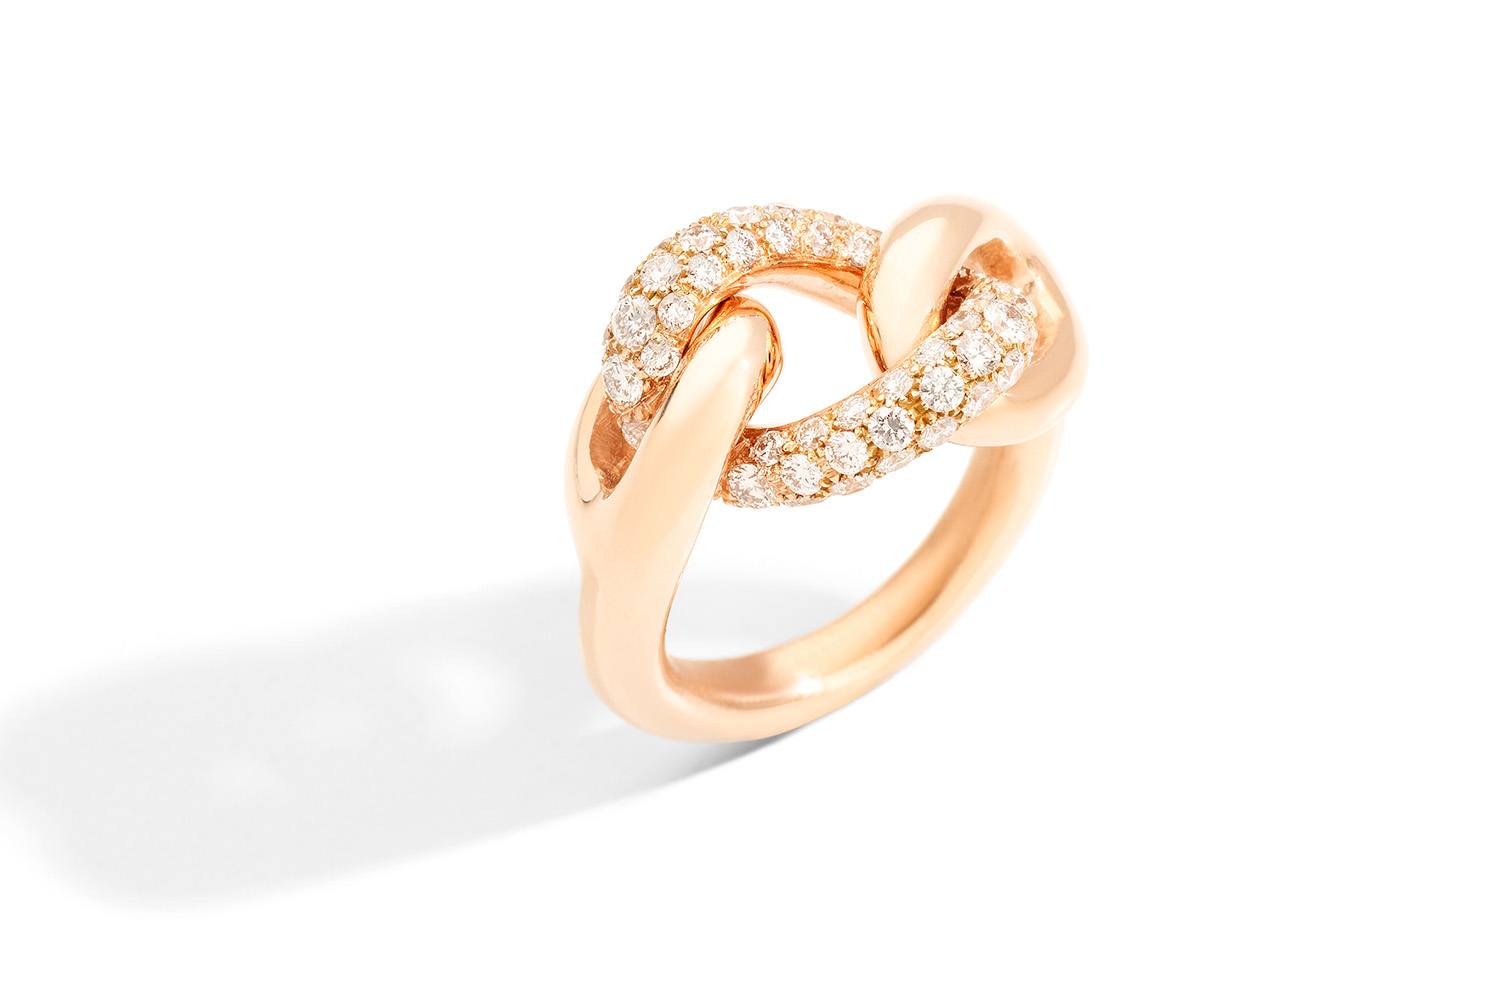 CATENE-ring-in-rose-gold-with-white-diamonds-by-Pomellato